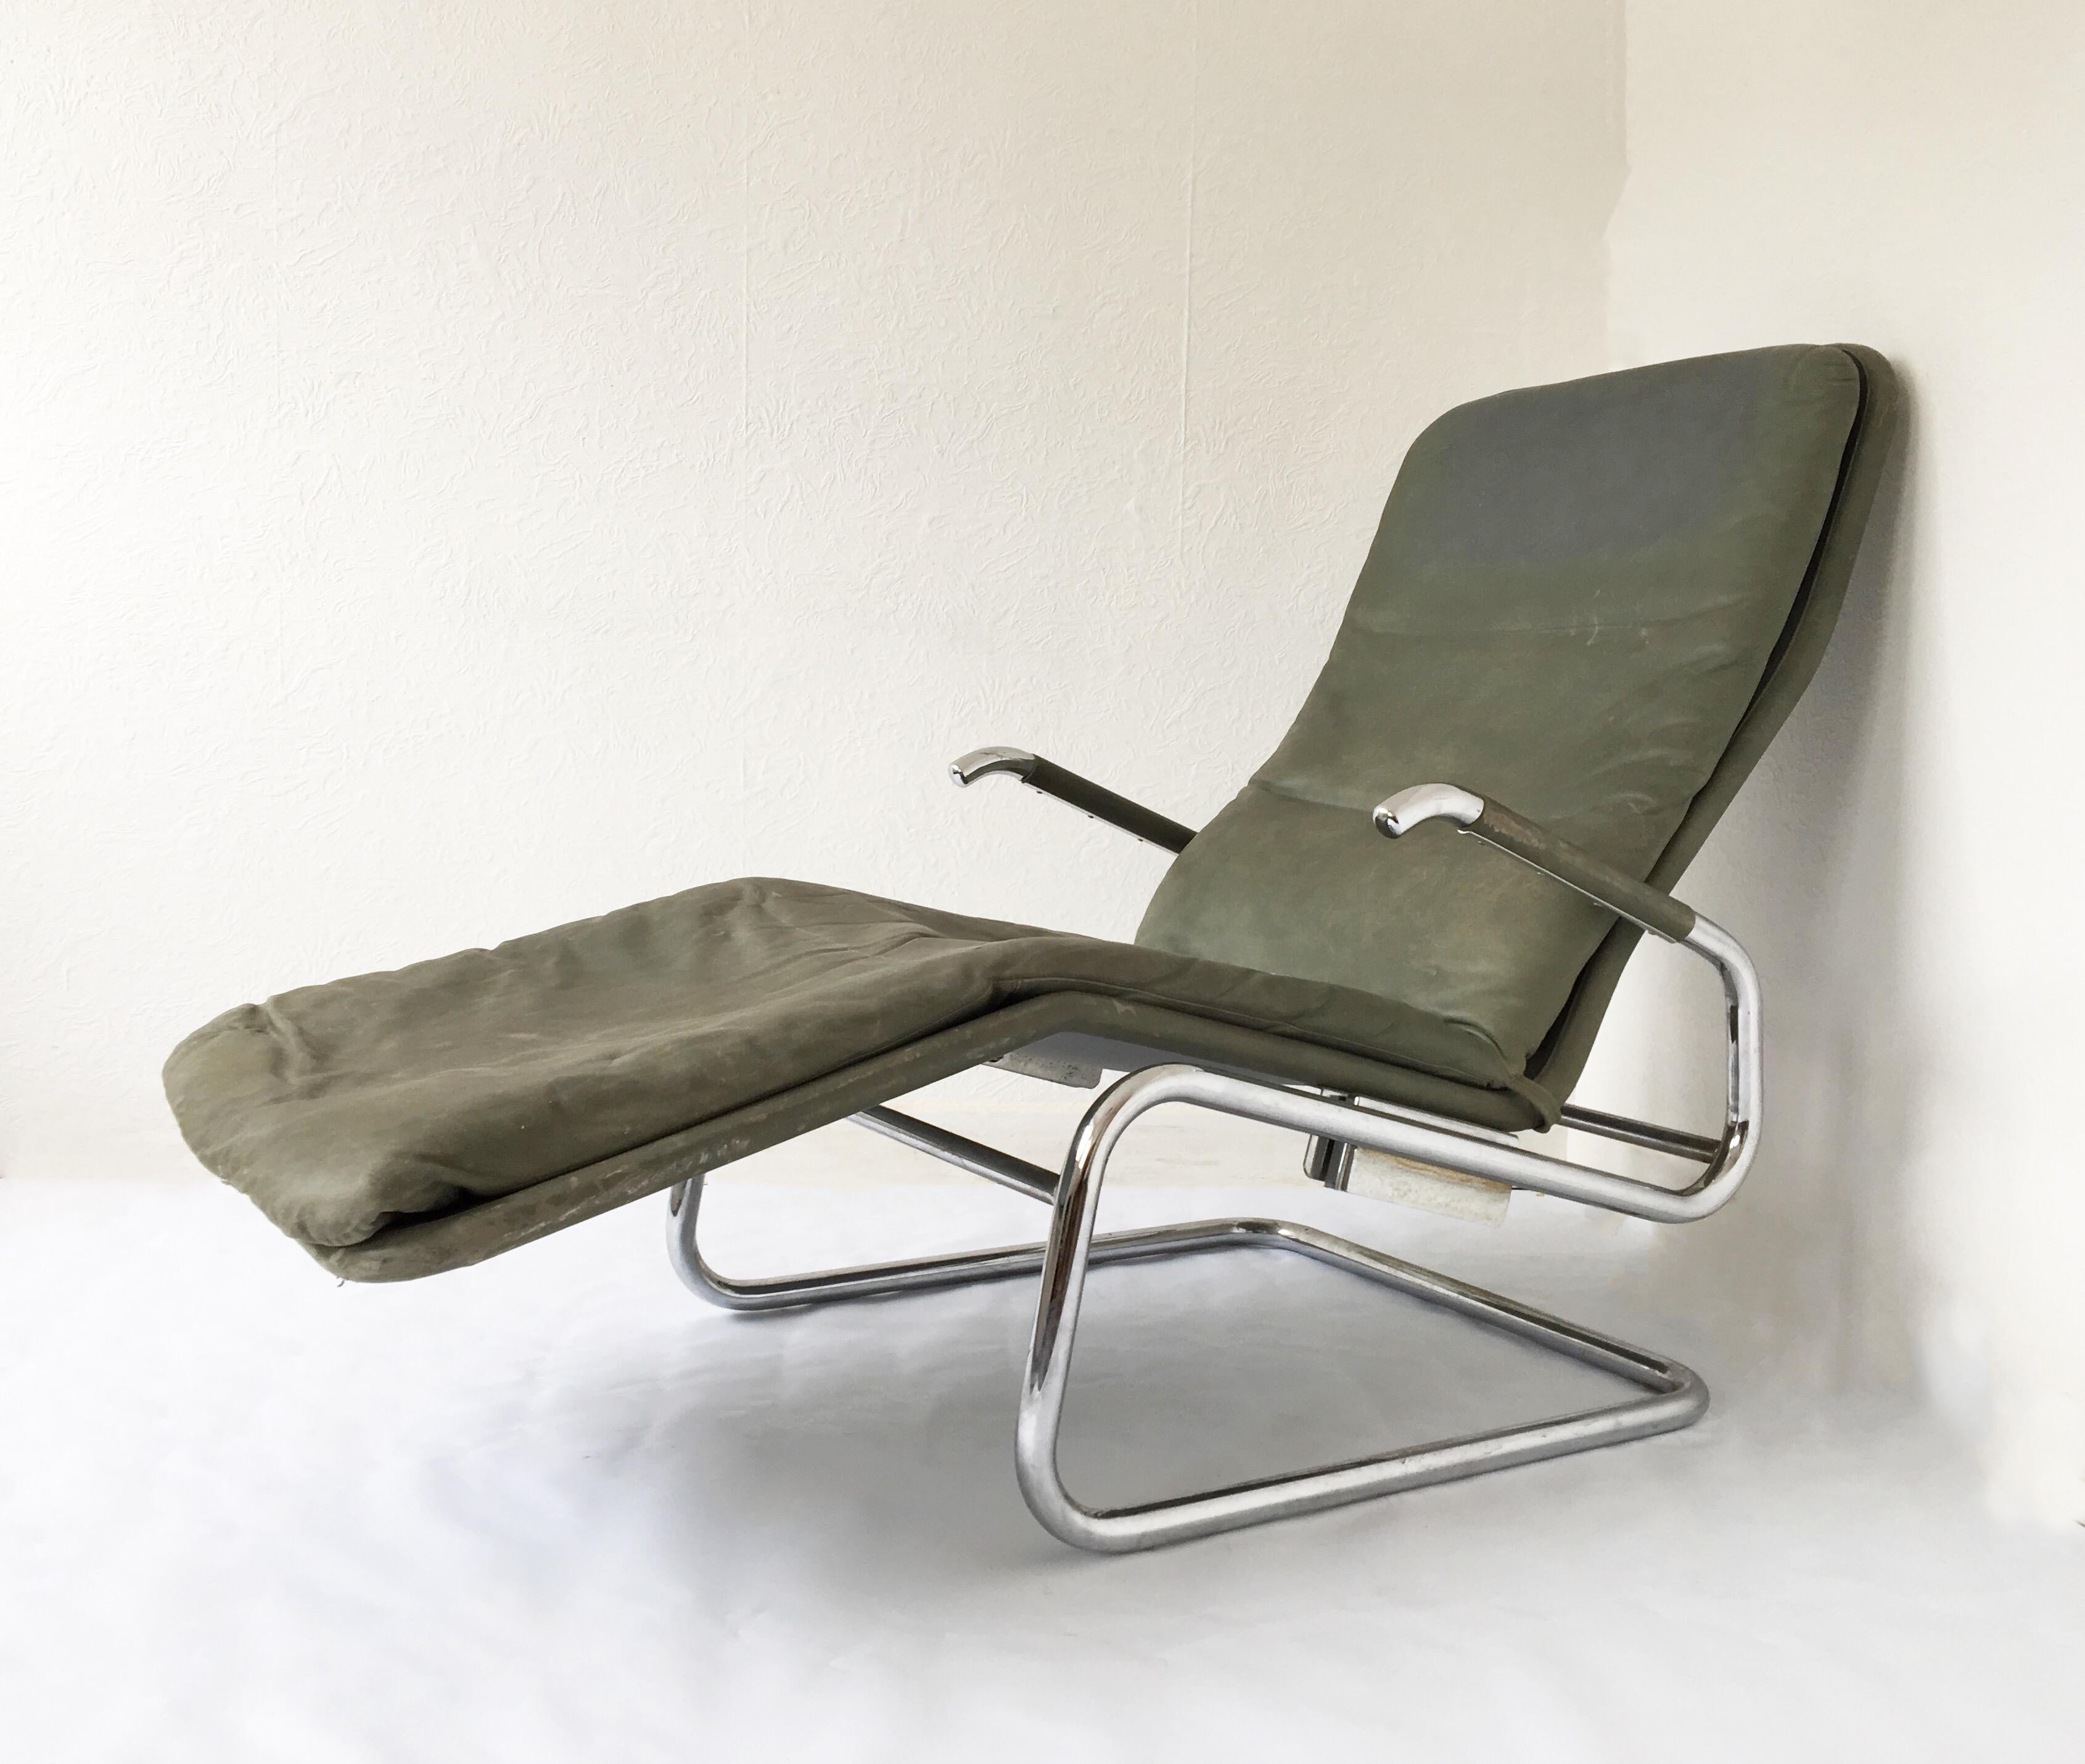 Exquisite, rare, reclining chaise designed by Kenneth Bergenblad for Dux, Sweden, circa 1970.